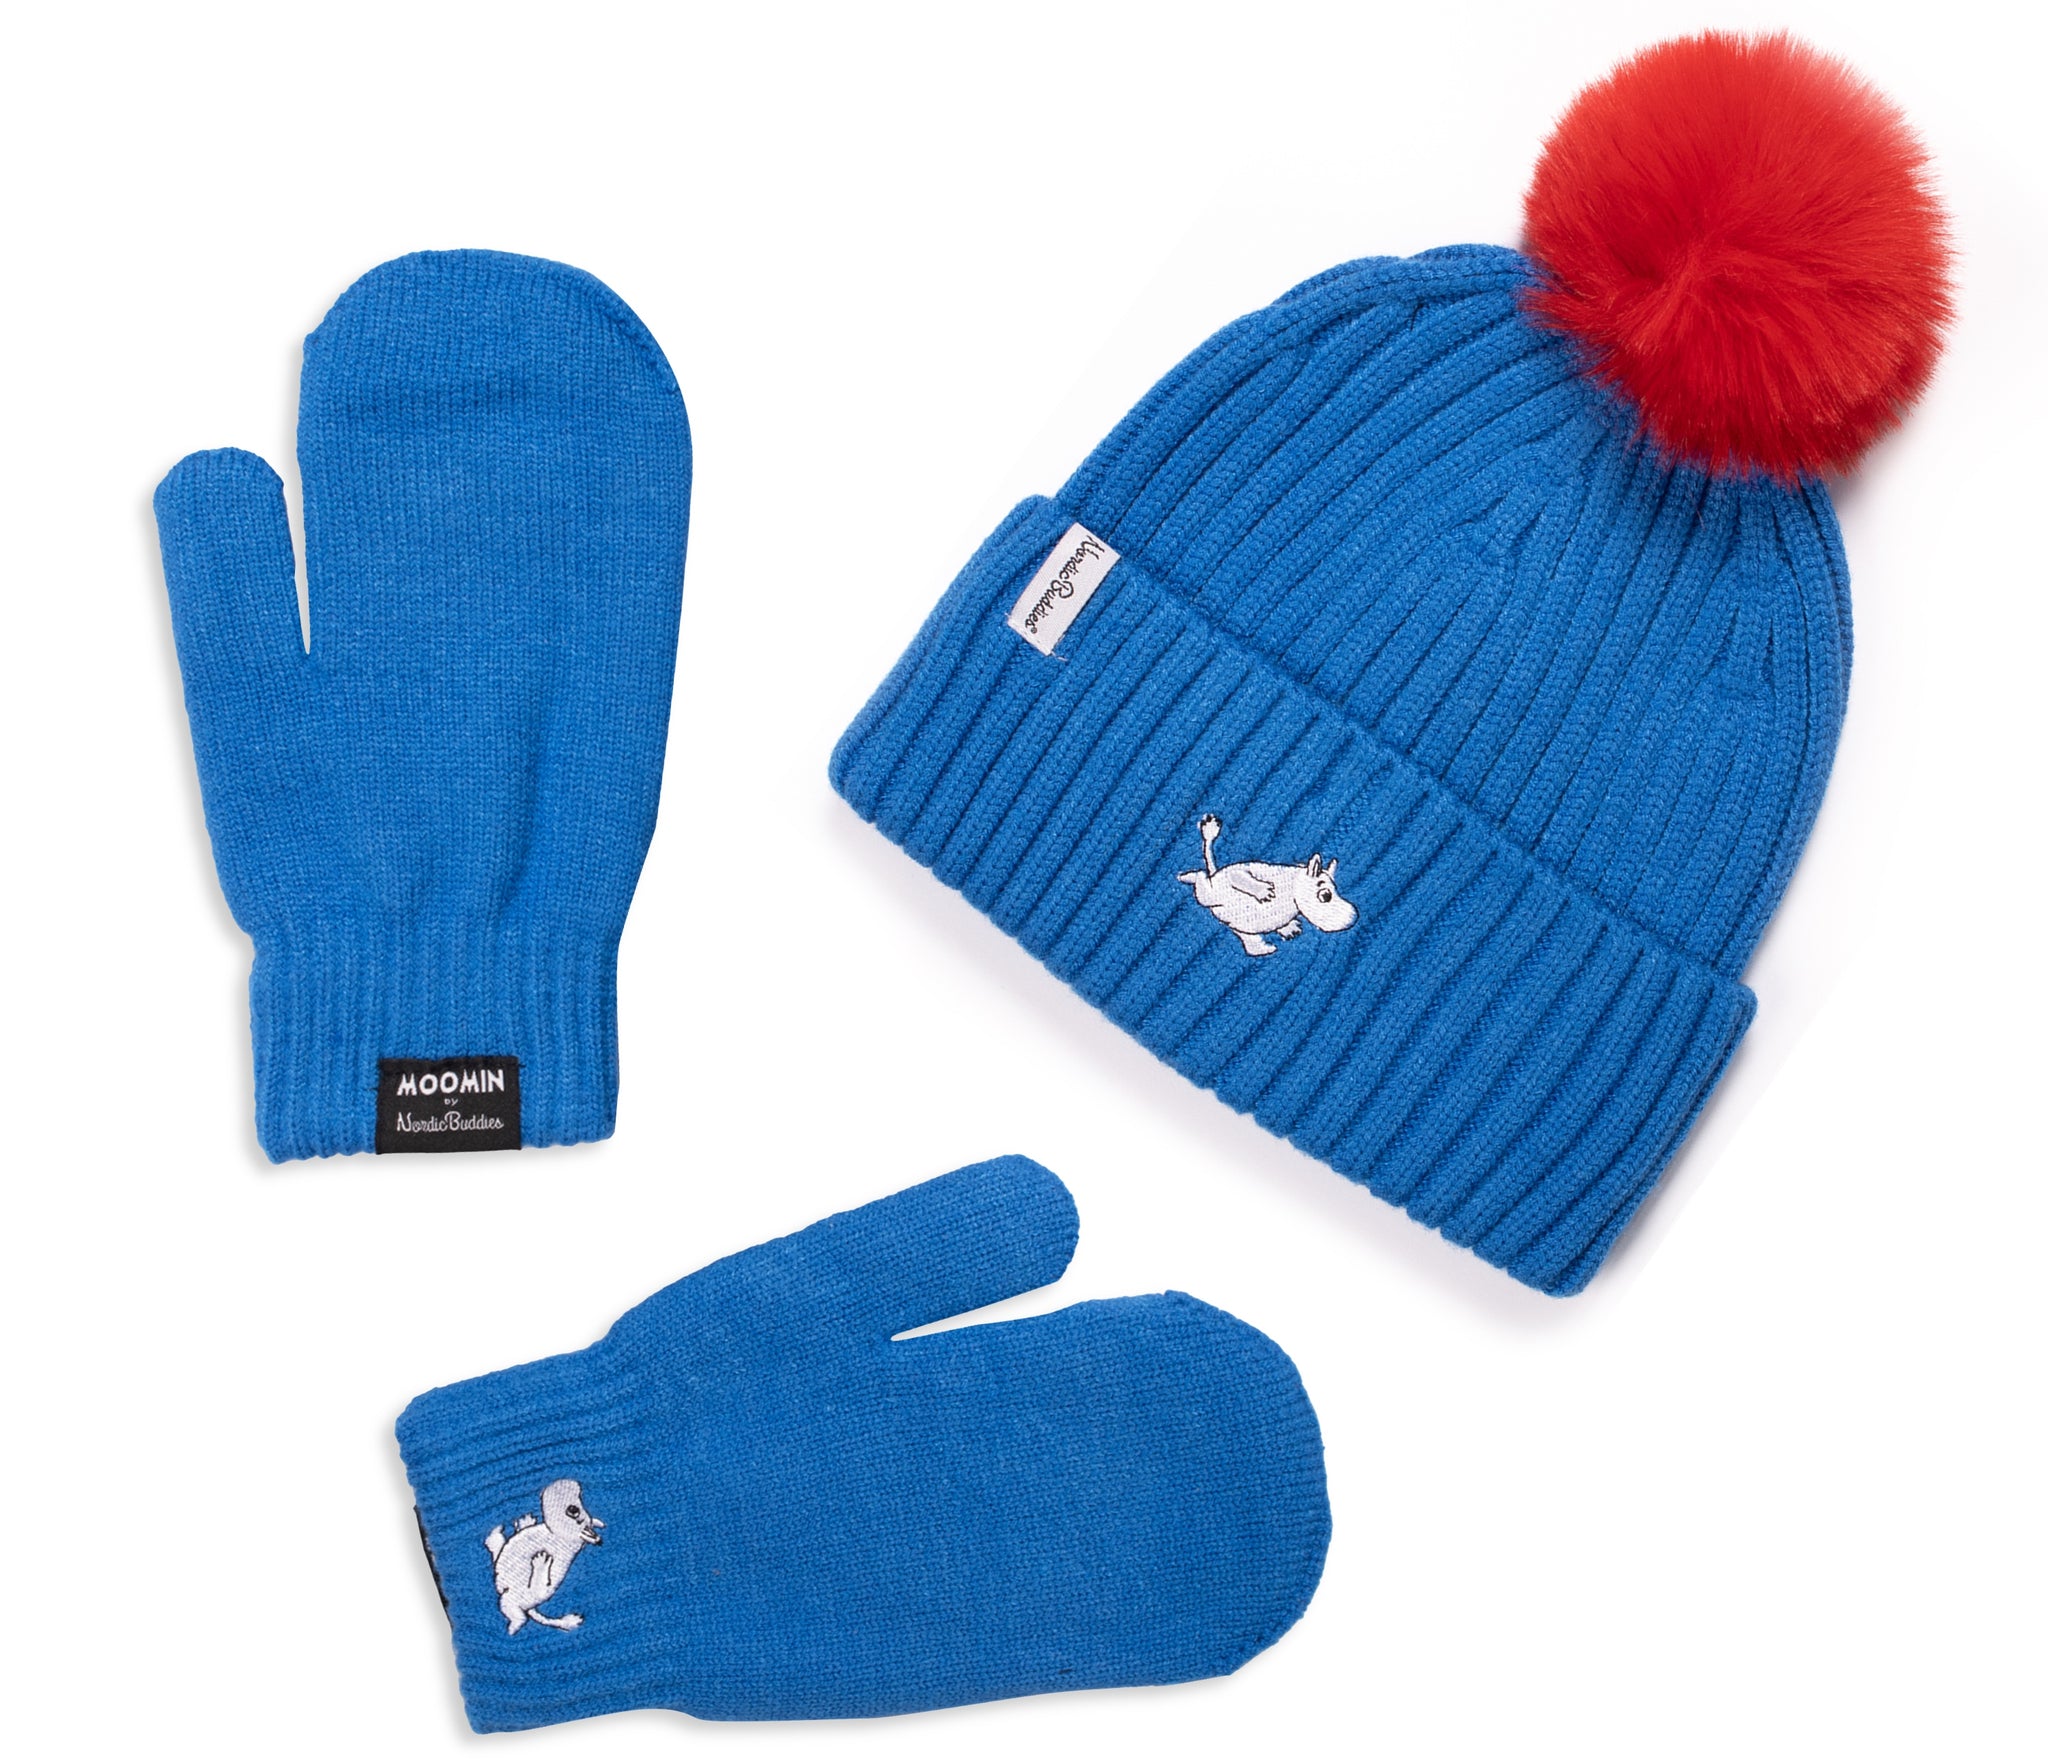 Moomintroll Mittens and Beanie Kids Combo - Blue